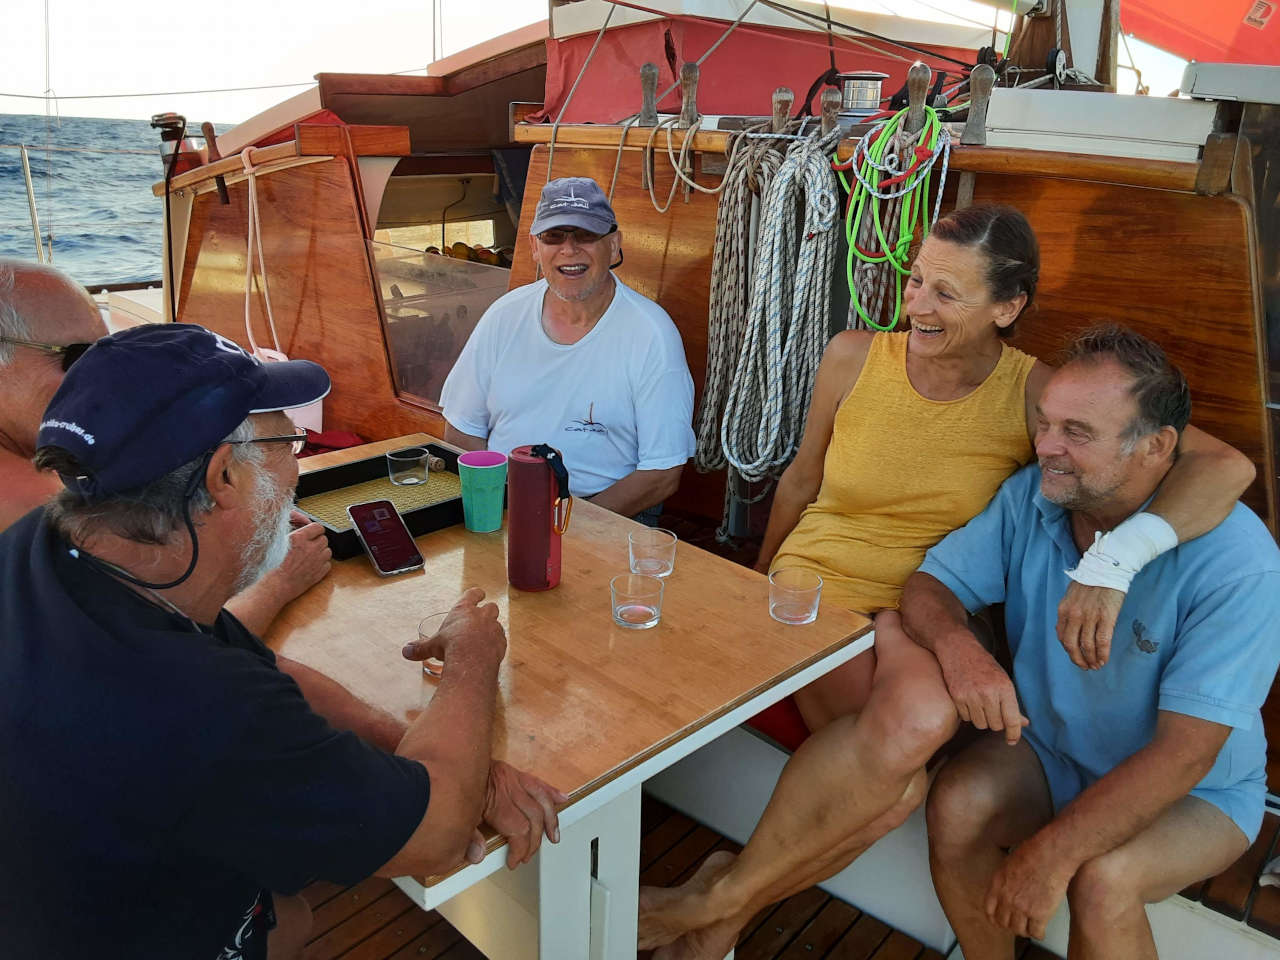 Crew members sat around the table on deck, smiling and laughing